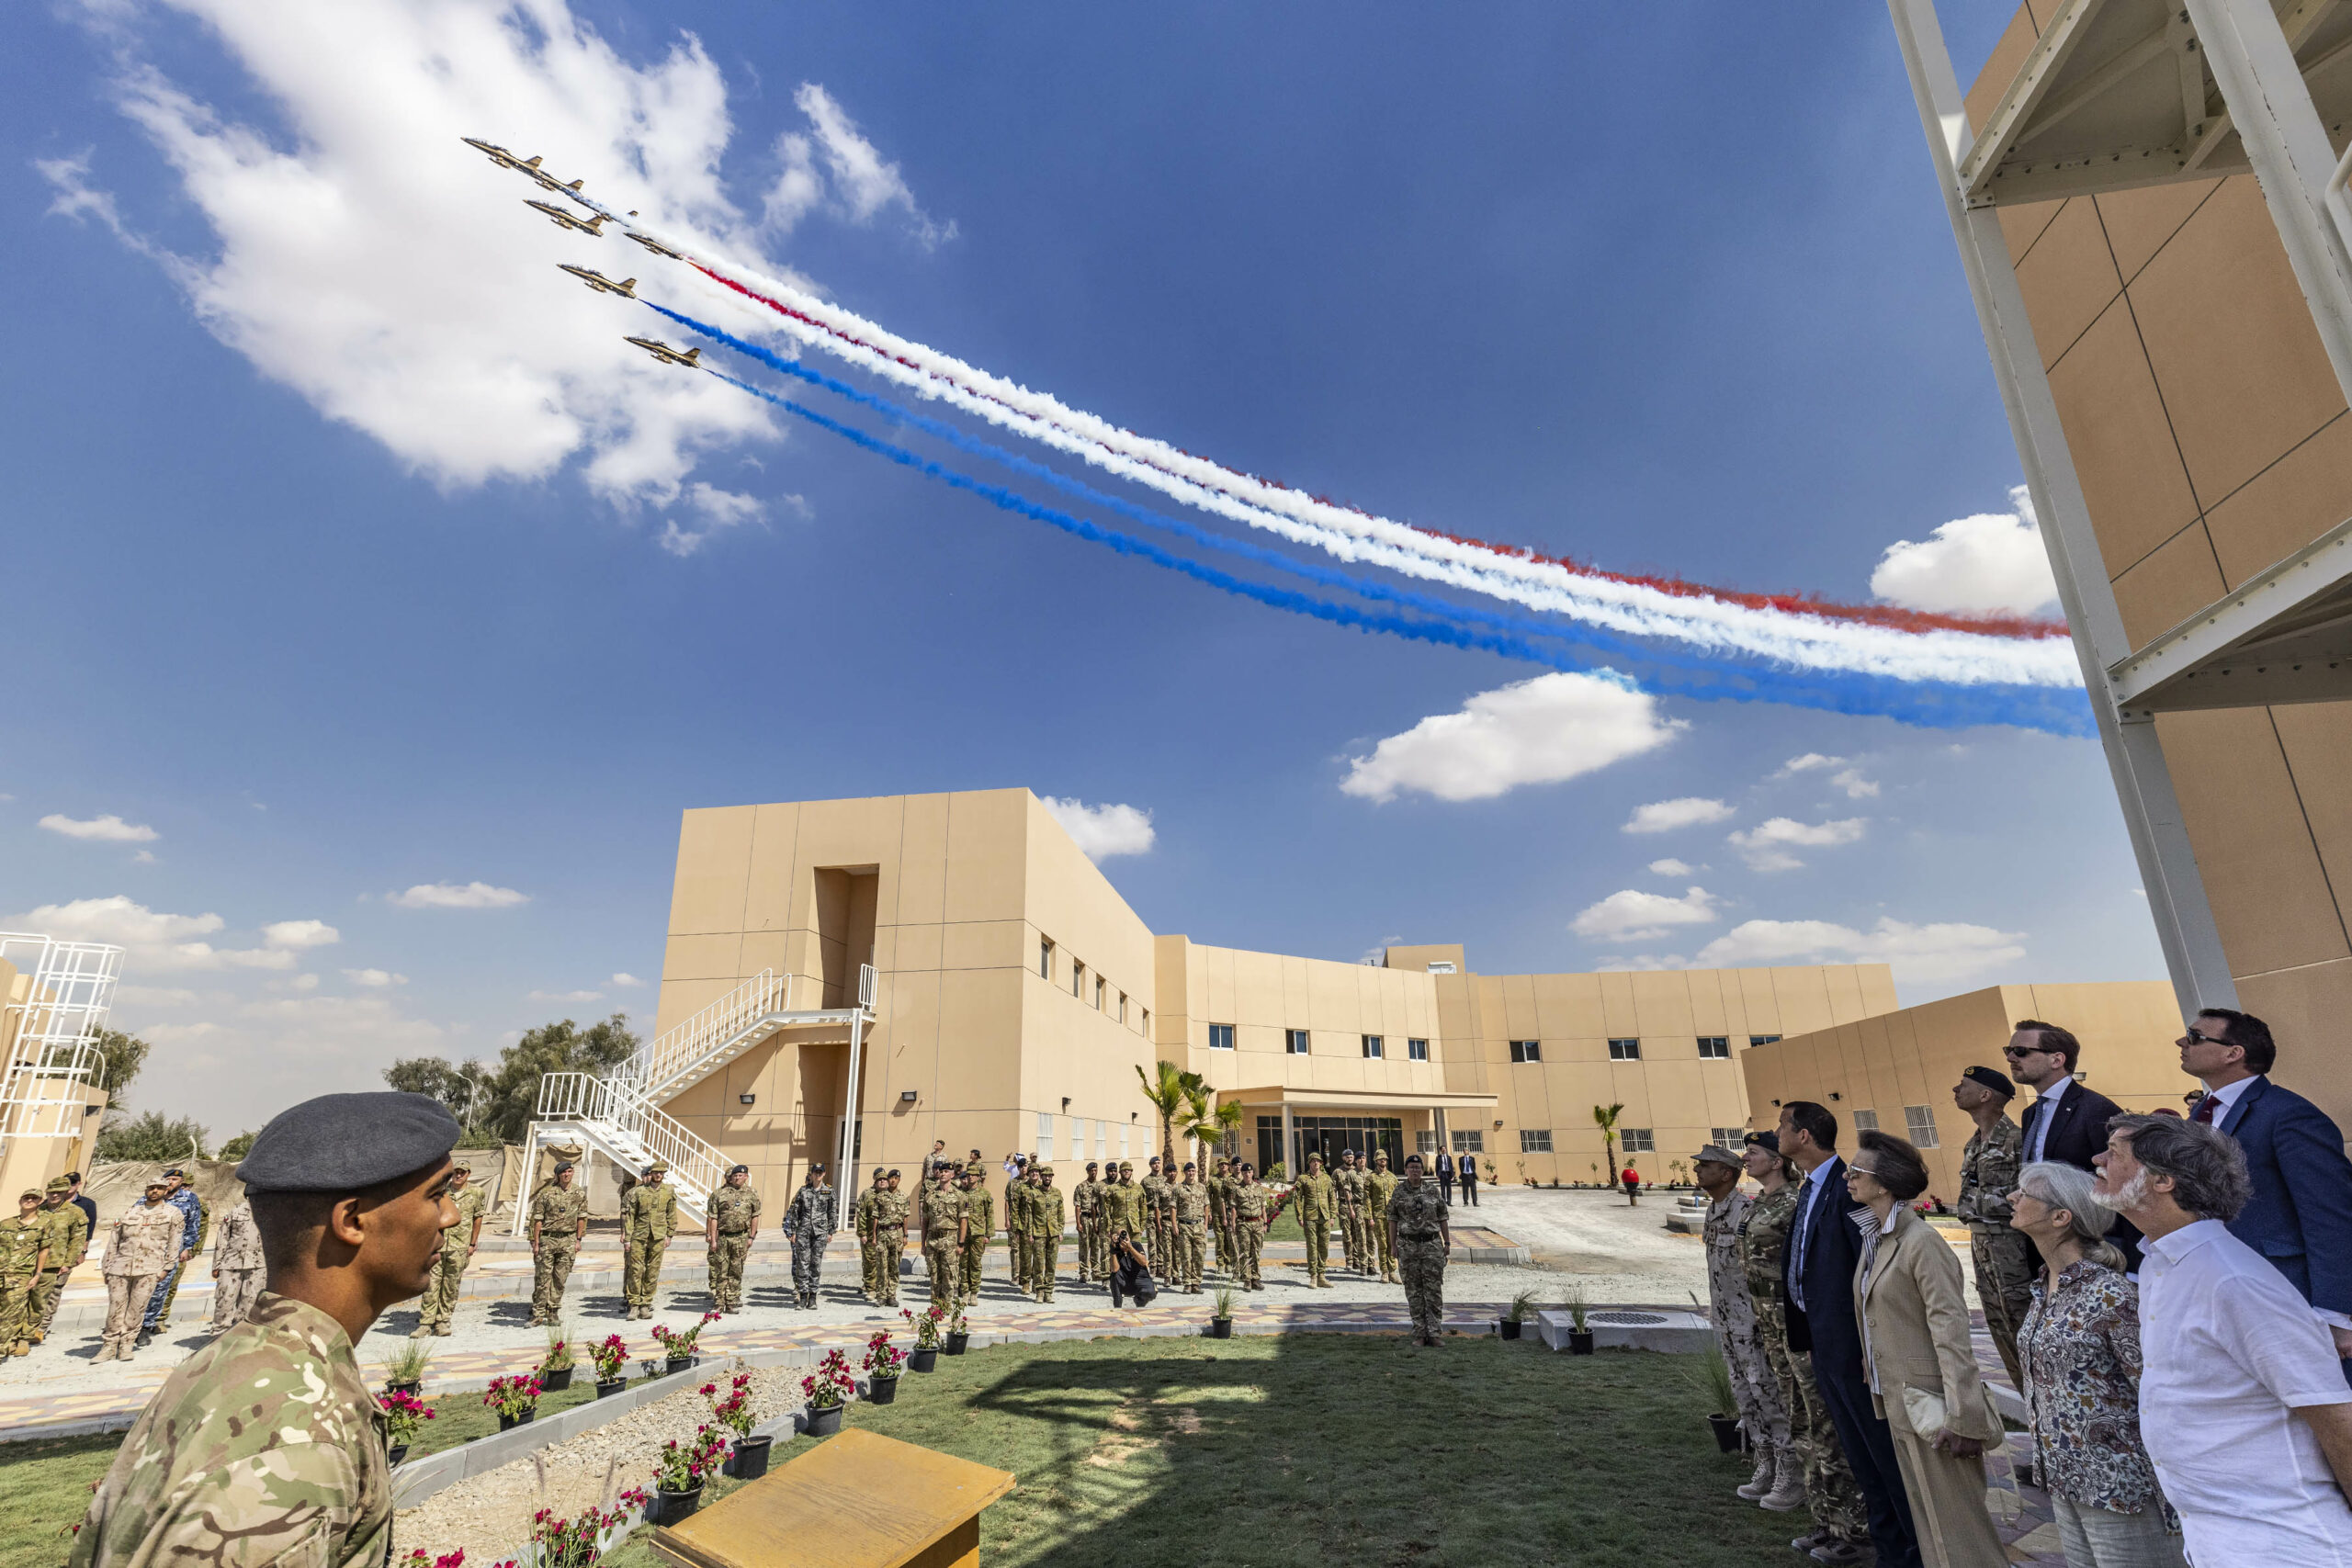 On 1 March 2024, Her Royal Highness (HRH) The Princess Royal officially opened a permanent UK military facility at Al-Minhad Air Base in the United Arab Emirates. The new HQ, accommodation and welfare facility is called Donnelly Lines, aft Sgt Donnelly who died in Feb 1943 in Furijarah after the crew of an RAF Wellington Bomber crash landed. The facility demonstrates the UK and RAF commitment to the UAE and the region as we stand side by side to work for peace and stability in the region. The UAE and the UK have a long and shared history and this development is the next step of that bilateral friendship.